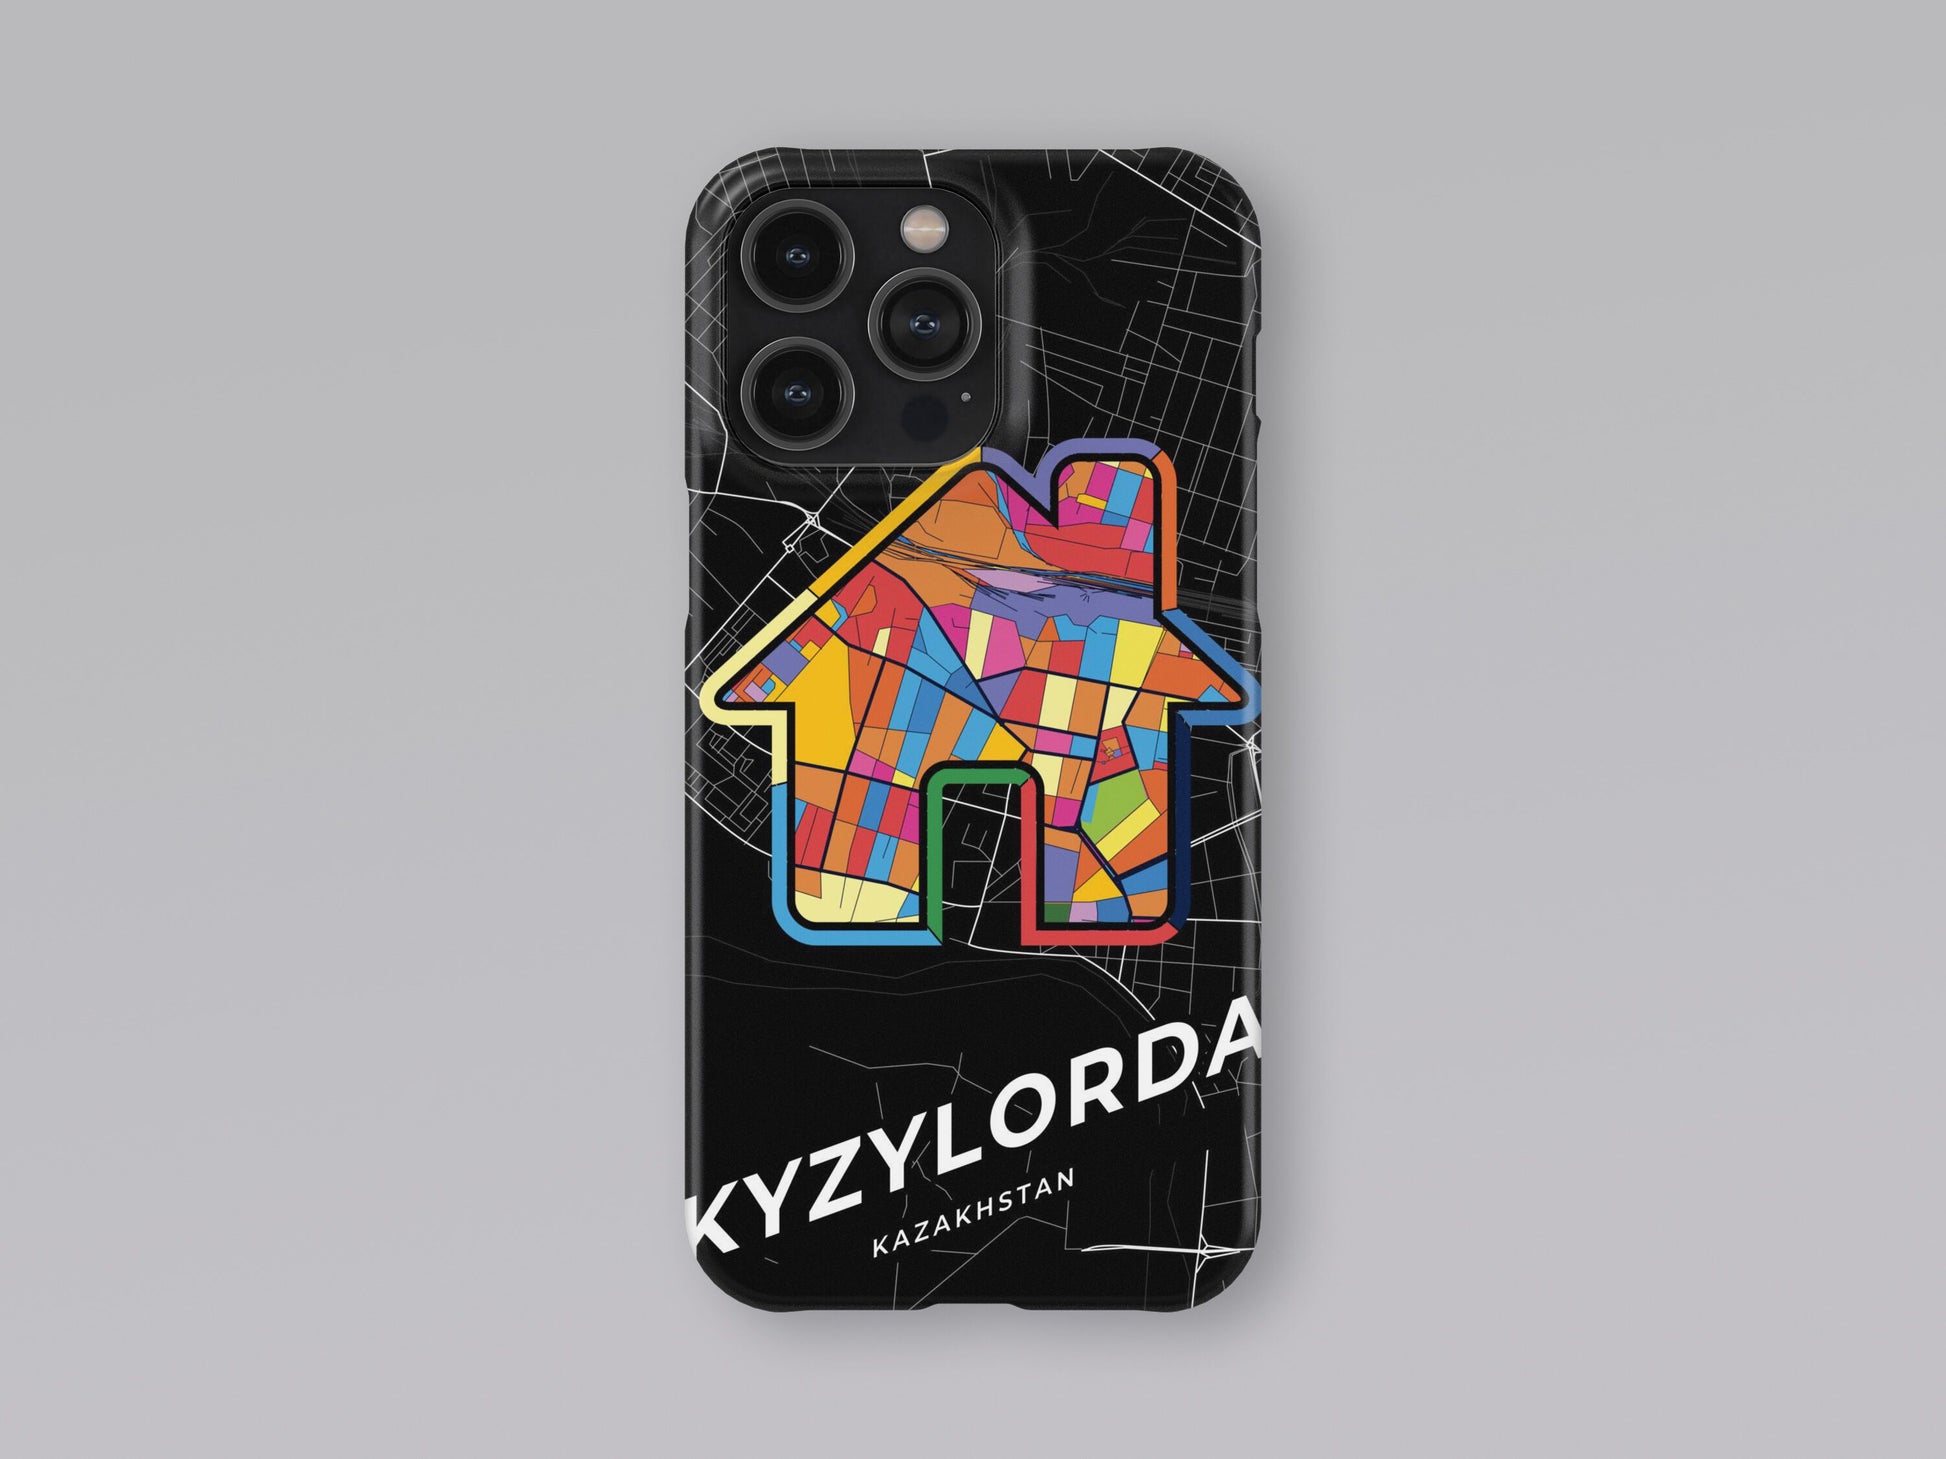 Kyzylorda Kazakhstan slim phone case with colorful icon. Birthday, wedding or housewarming gift. Couple match cases. 3